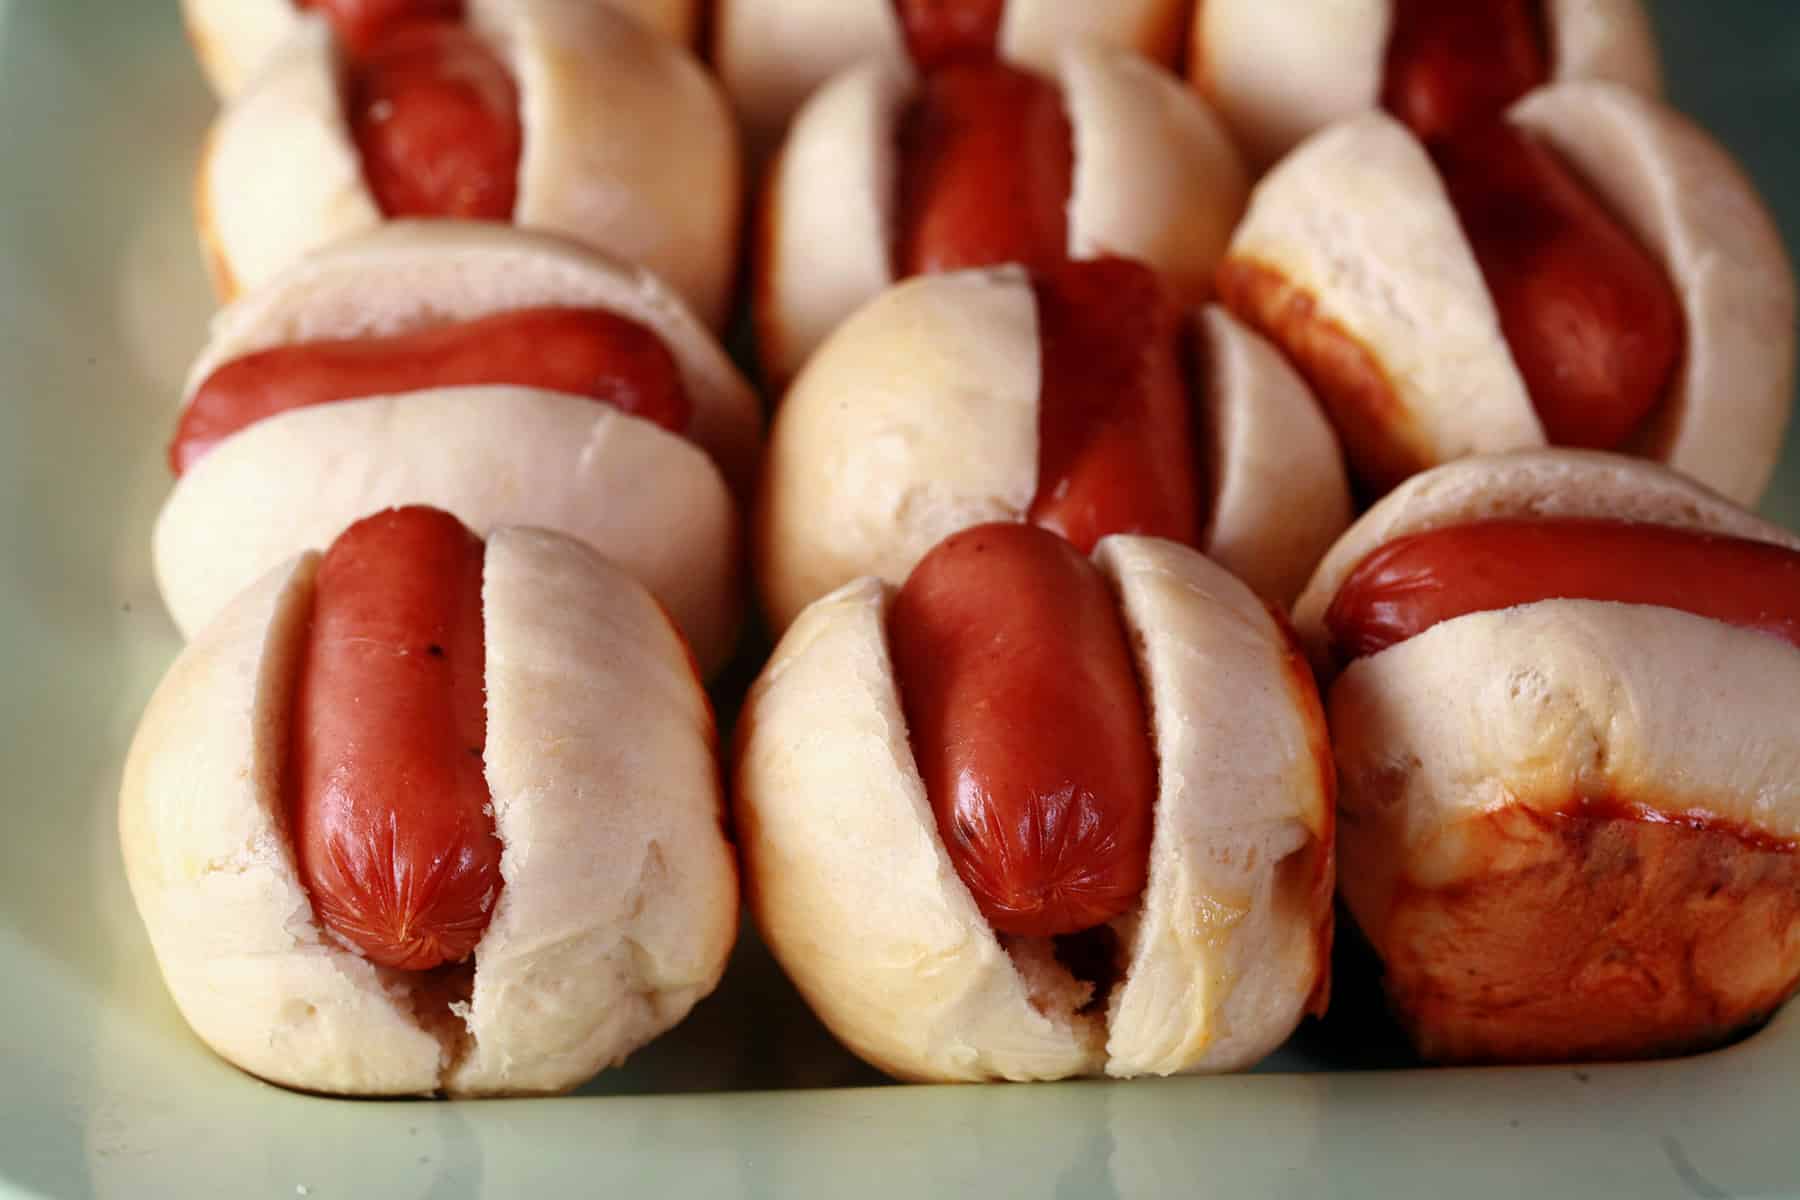 A plate of hot dog sliders.